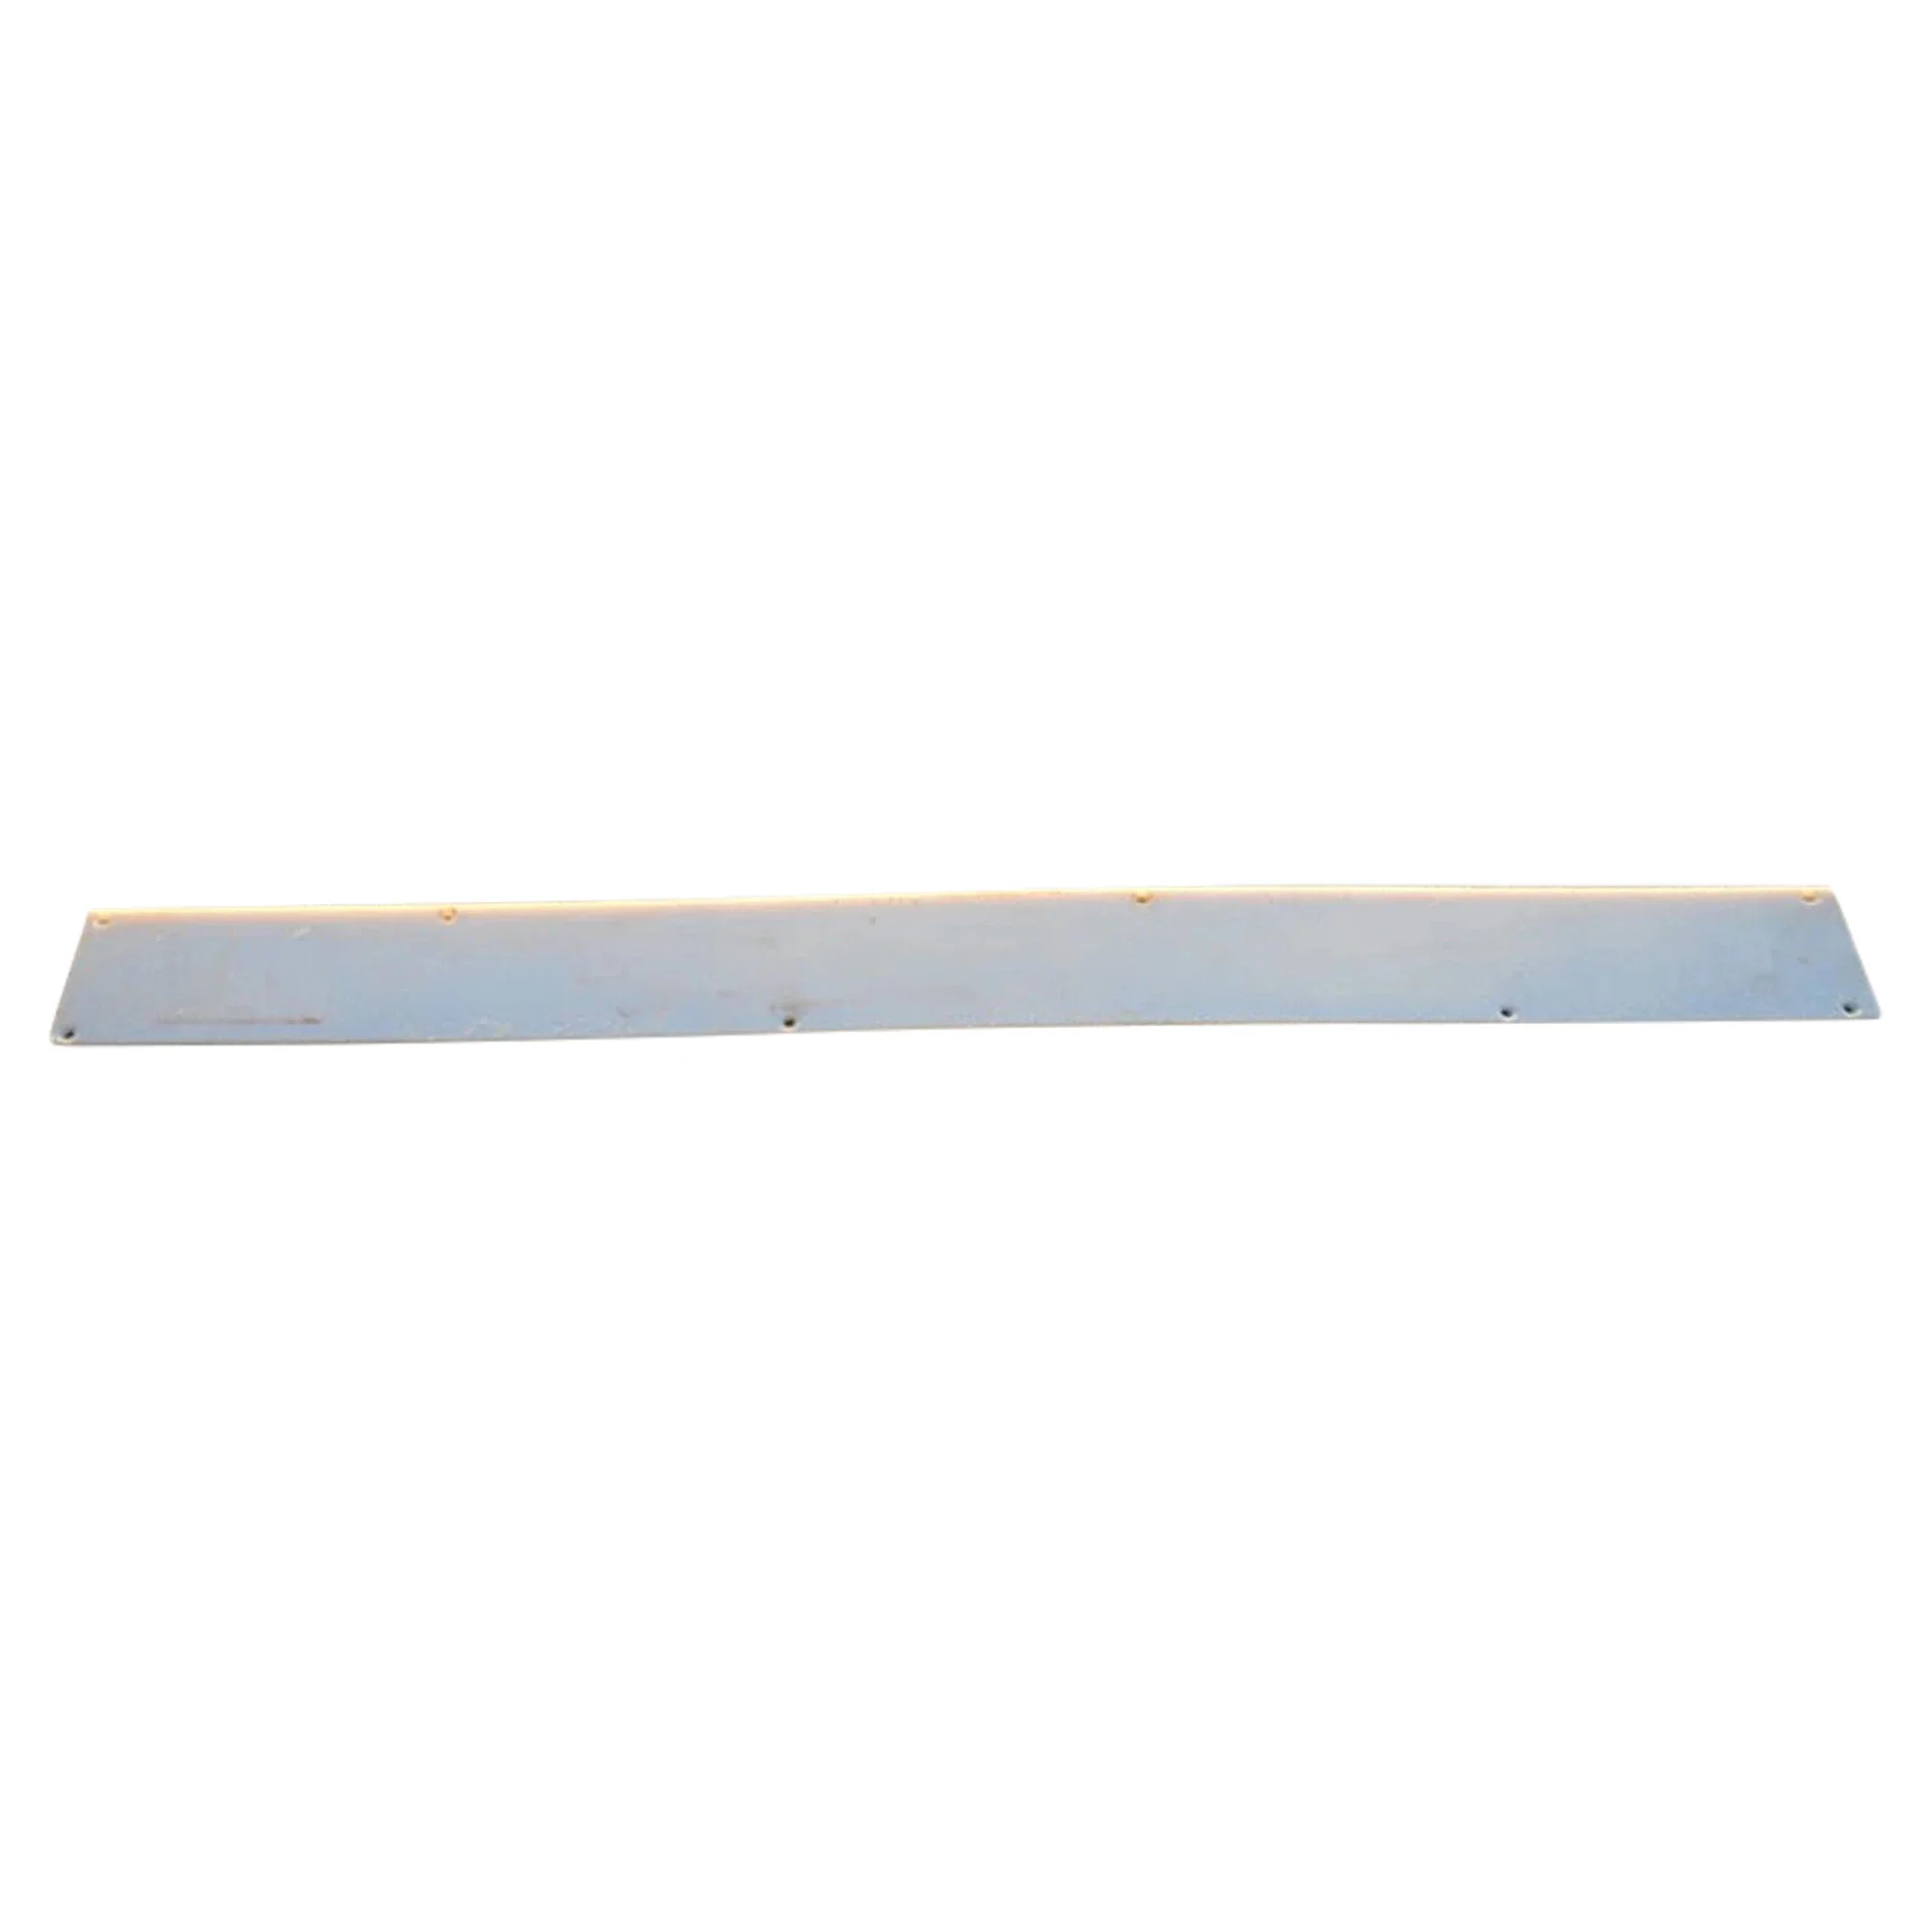 Wastebuilt® Replacement for McNeilus Strip Wear, Arm Track